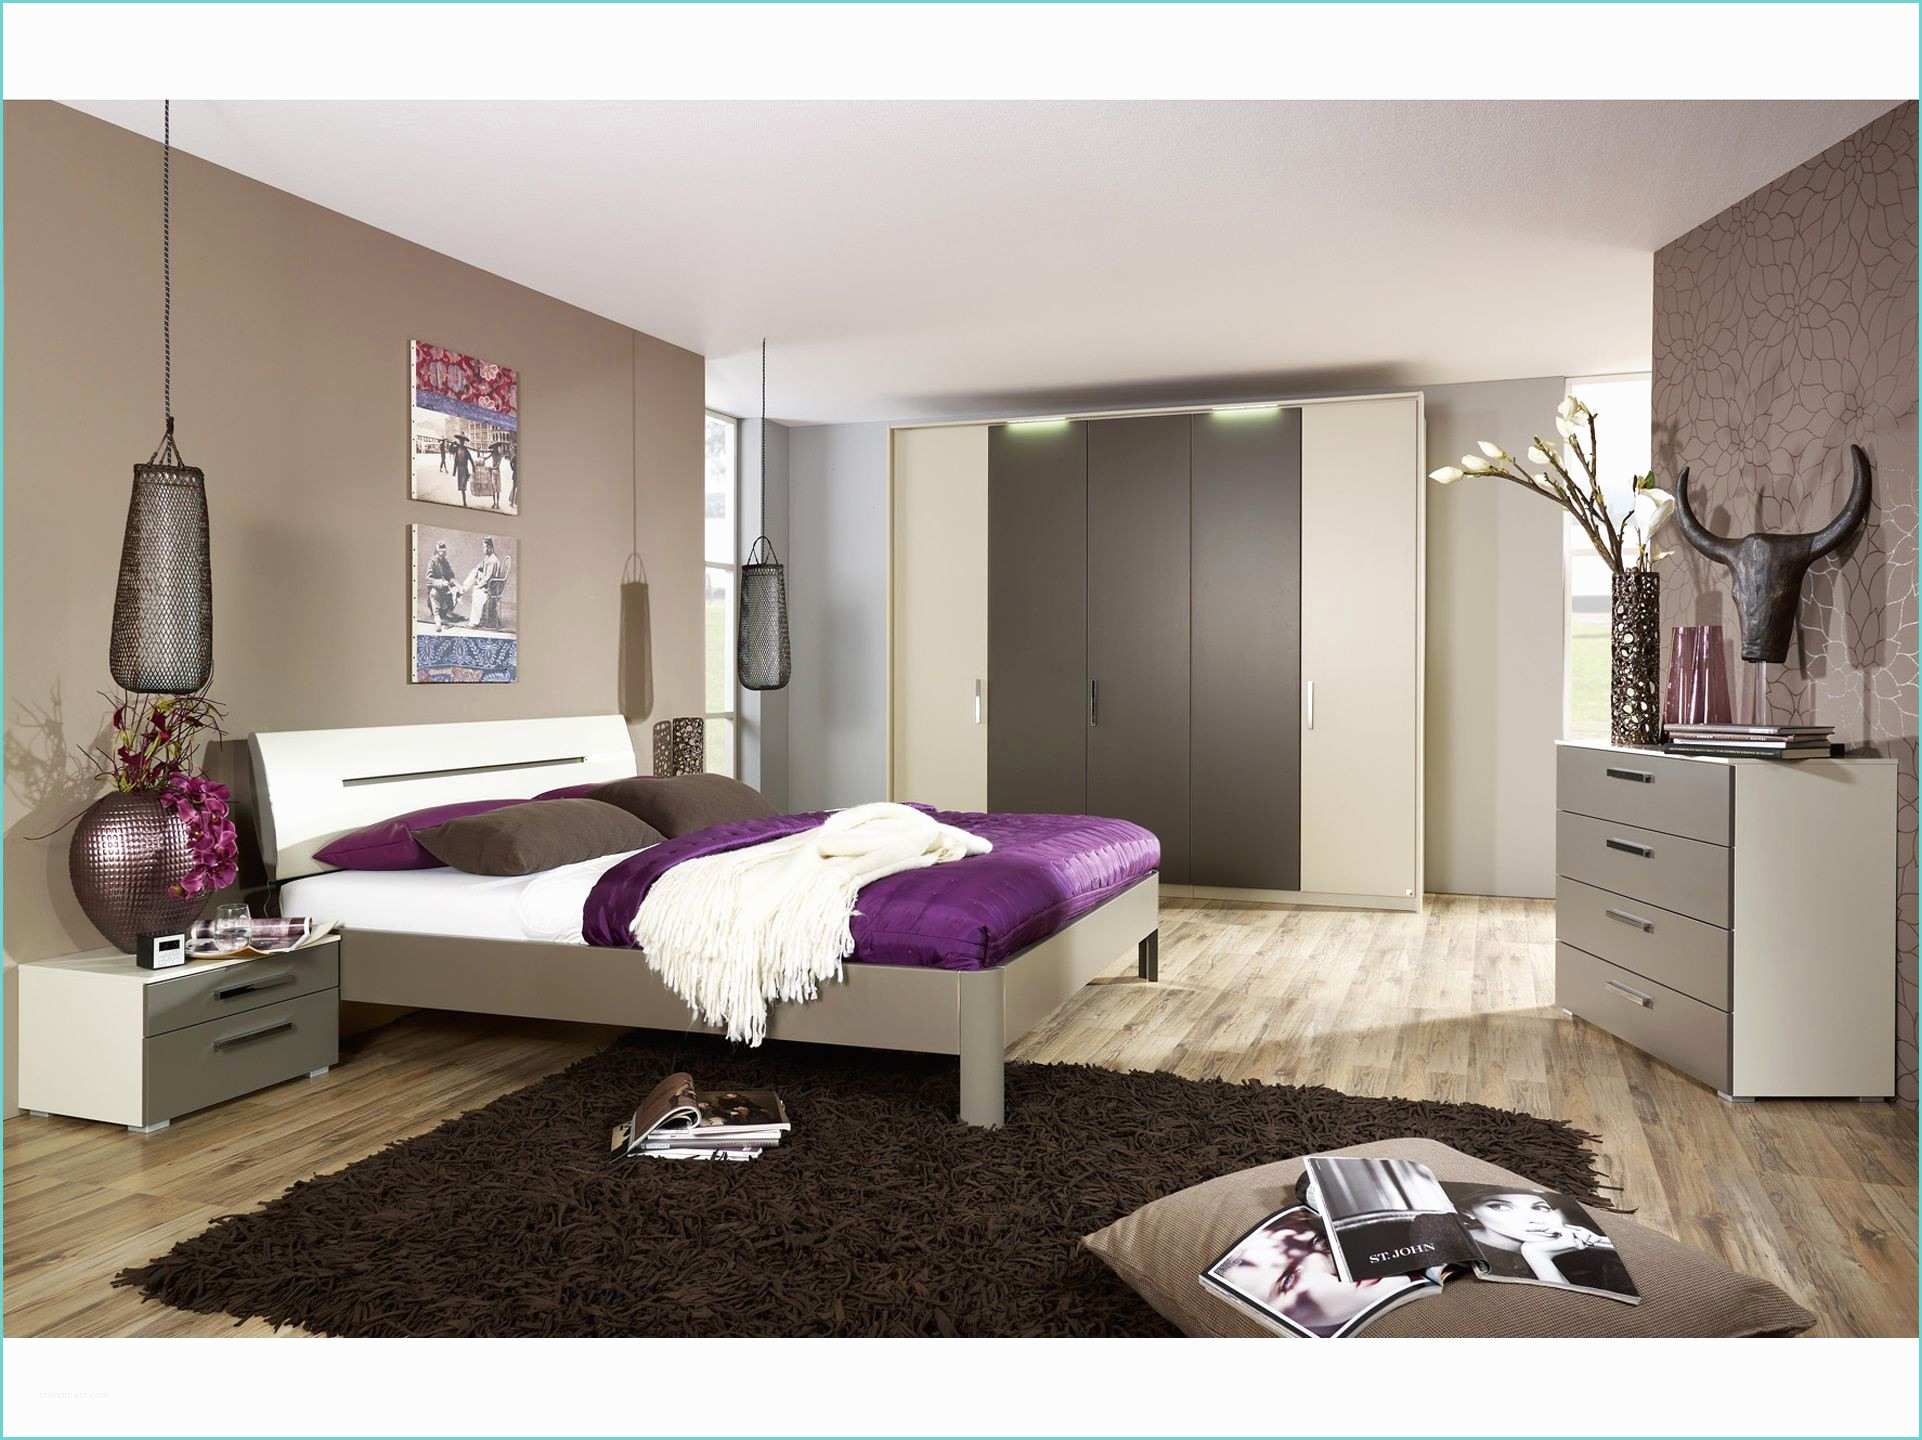 Chambre A Coucher Adulte Moderne Chambre Coucher Adulte Moderne Deco Pinterest Chambre A